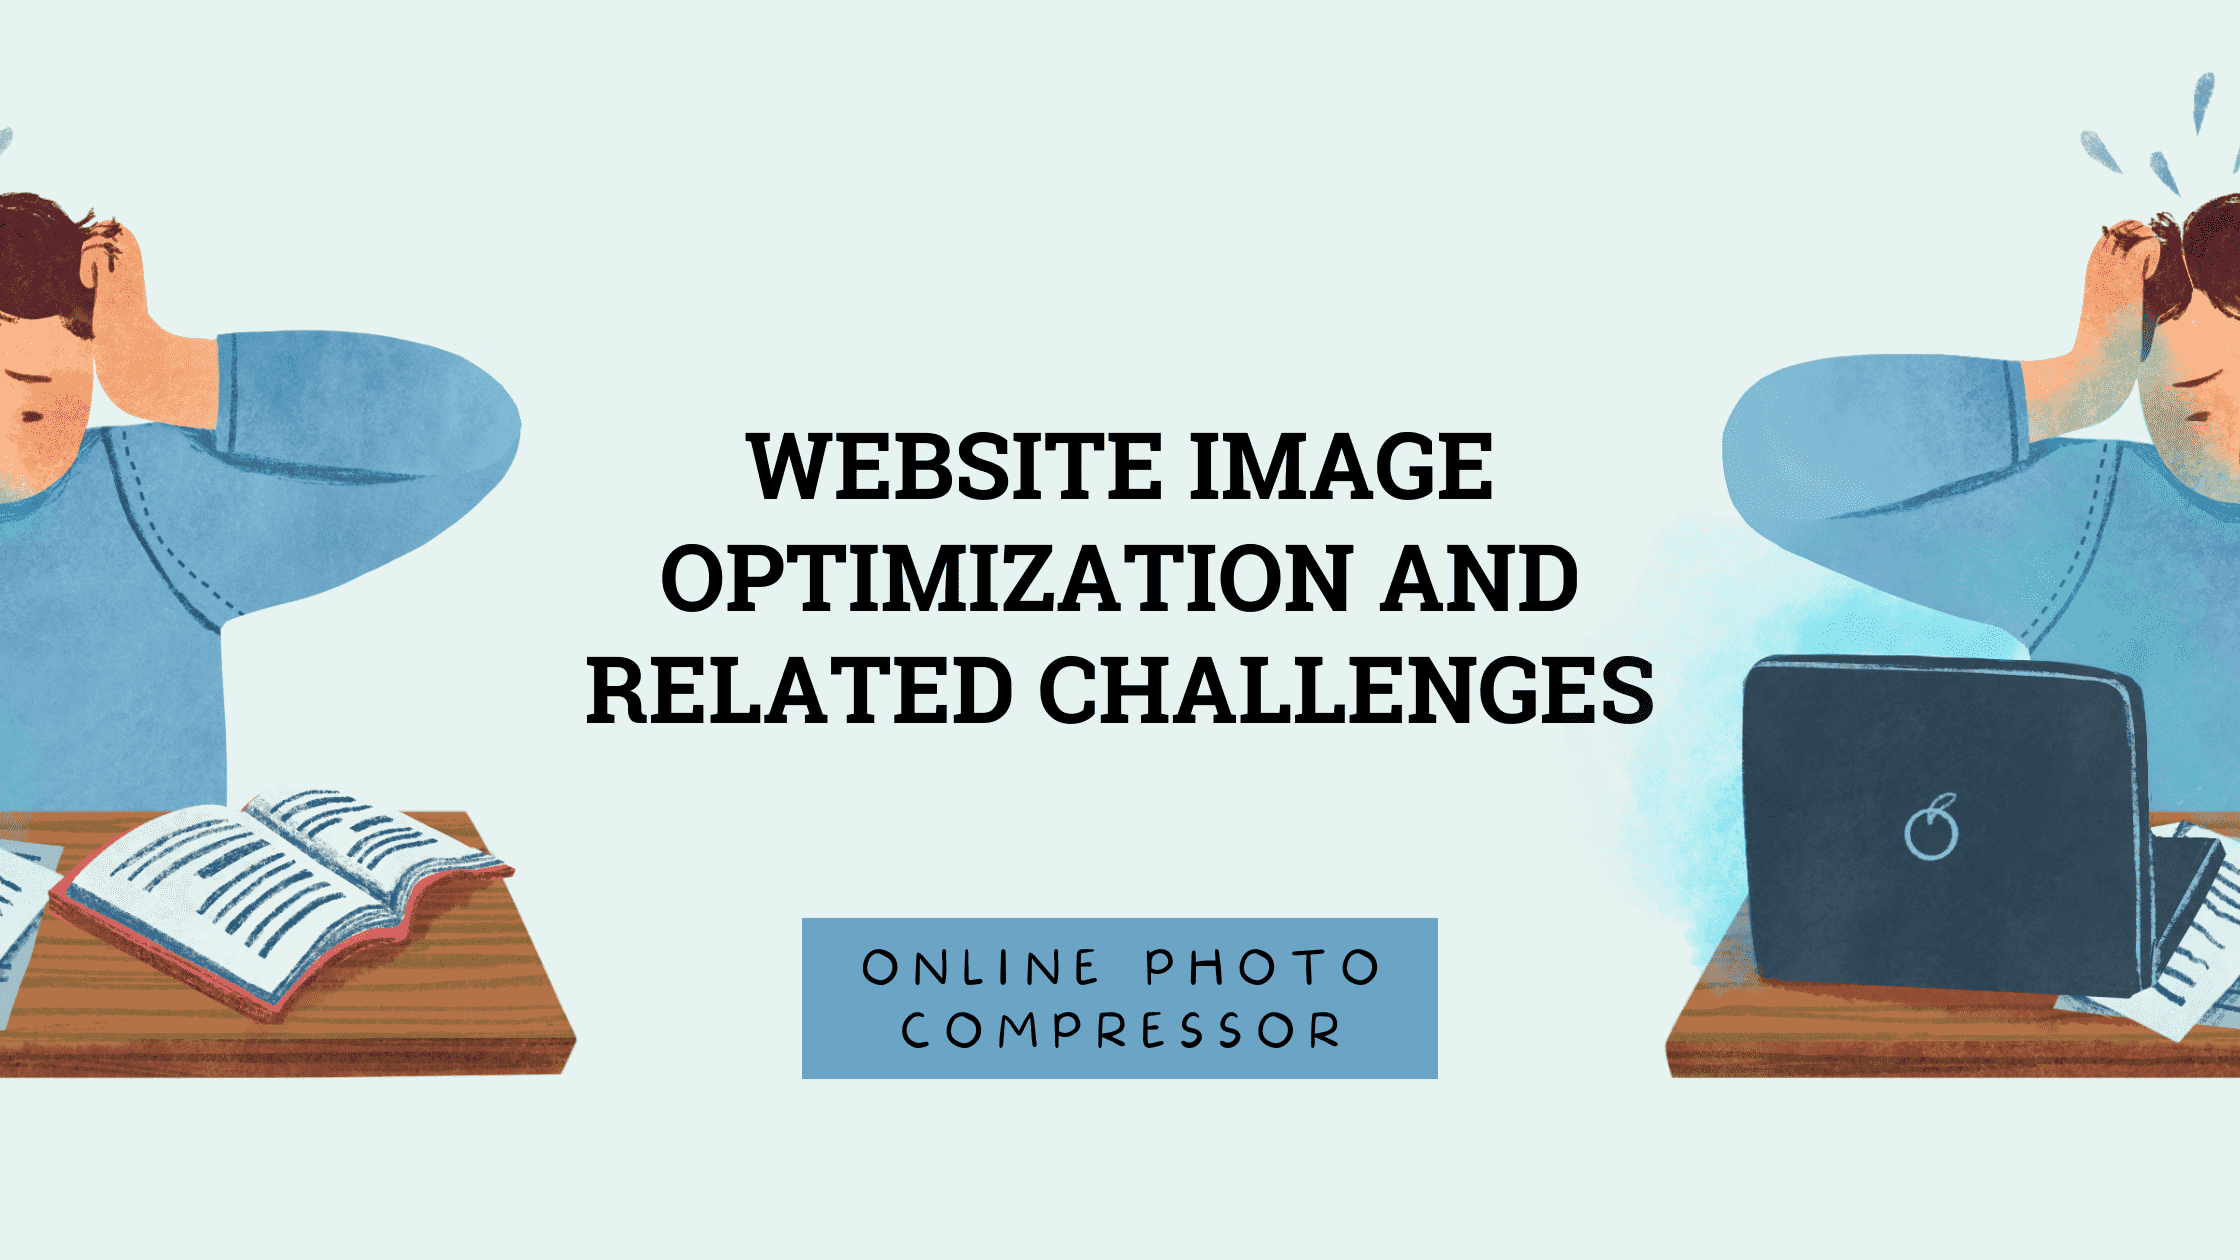 Website Image Optimization And Related Challenges